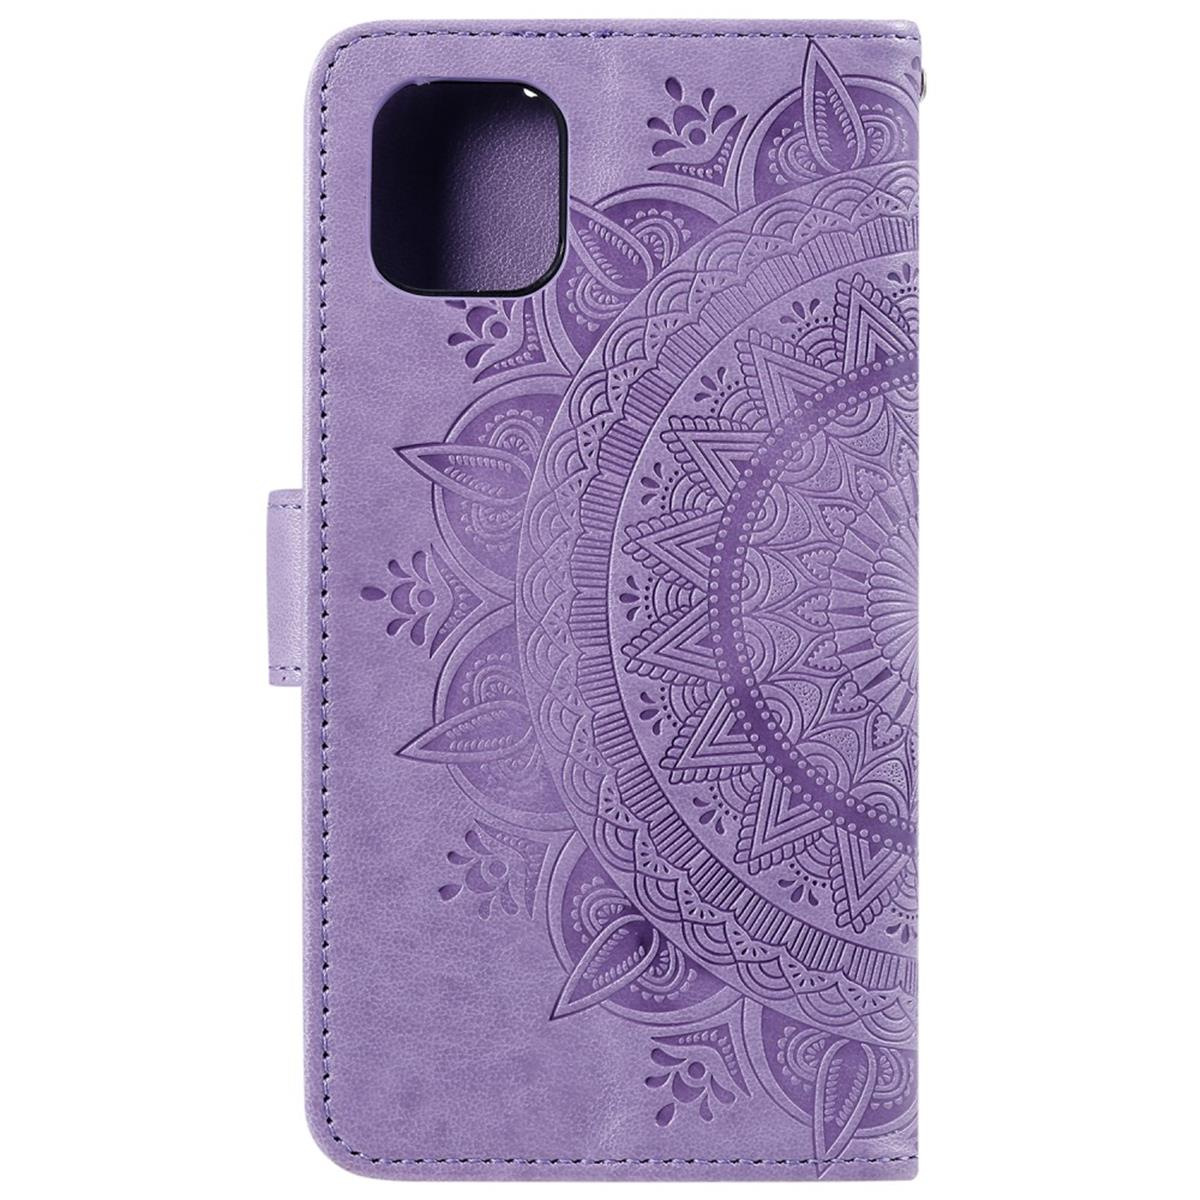 COVERKINGZ Klapphülle mit Mandala Lila 11, Apple, Bookcover, Muster, iPhone